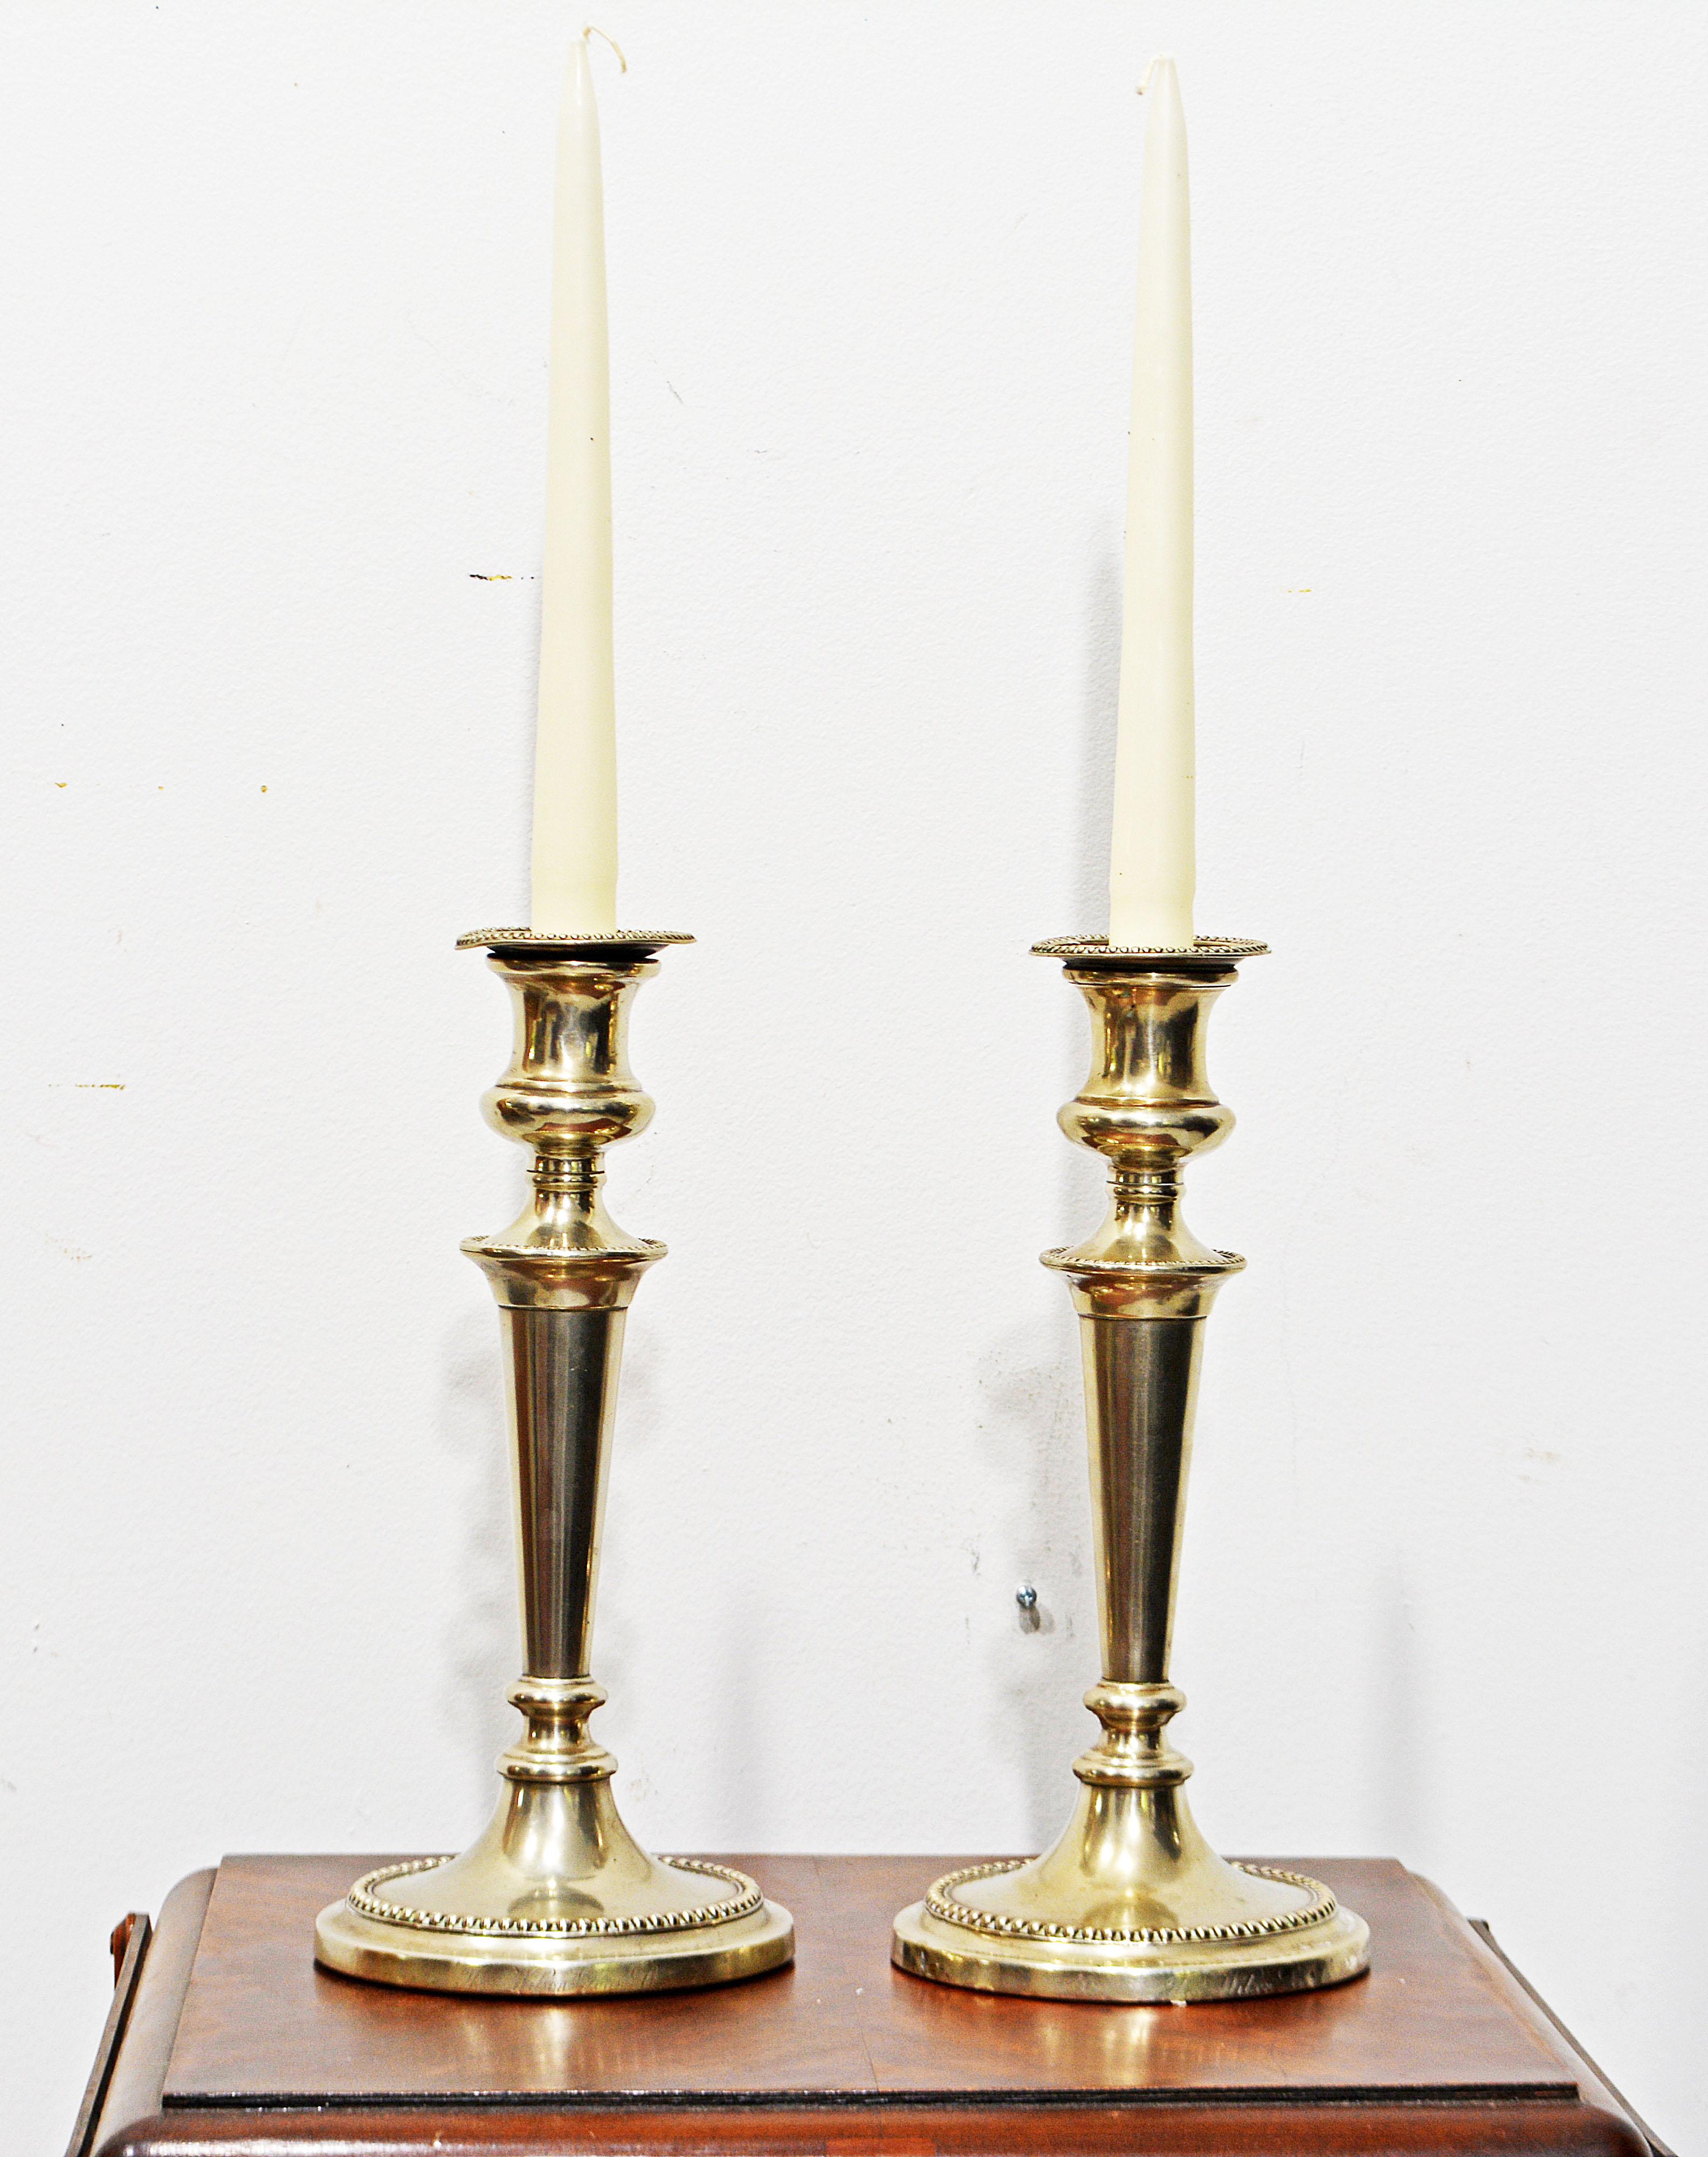 Fashioned in the Adam style with tapering stems and beaded edges these fine Sheffield cansle sticks are both inscribed on the bases 'Thos. Wilson Sons Co' Thomas Wilson was a silver smith in Sheffield in the late 19th and early 20th century. They